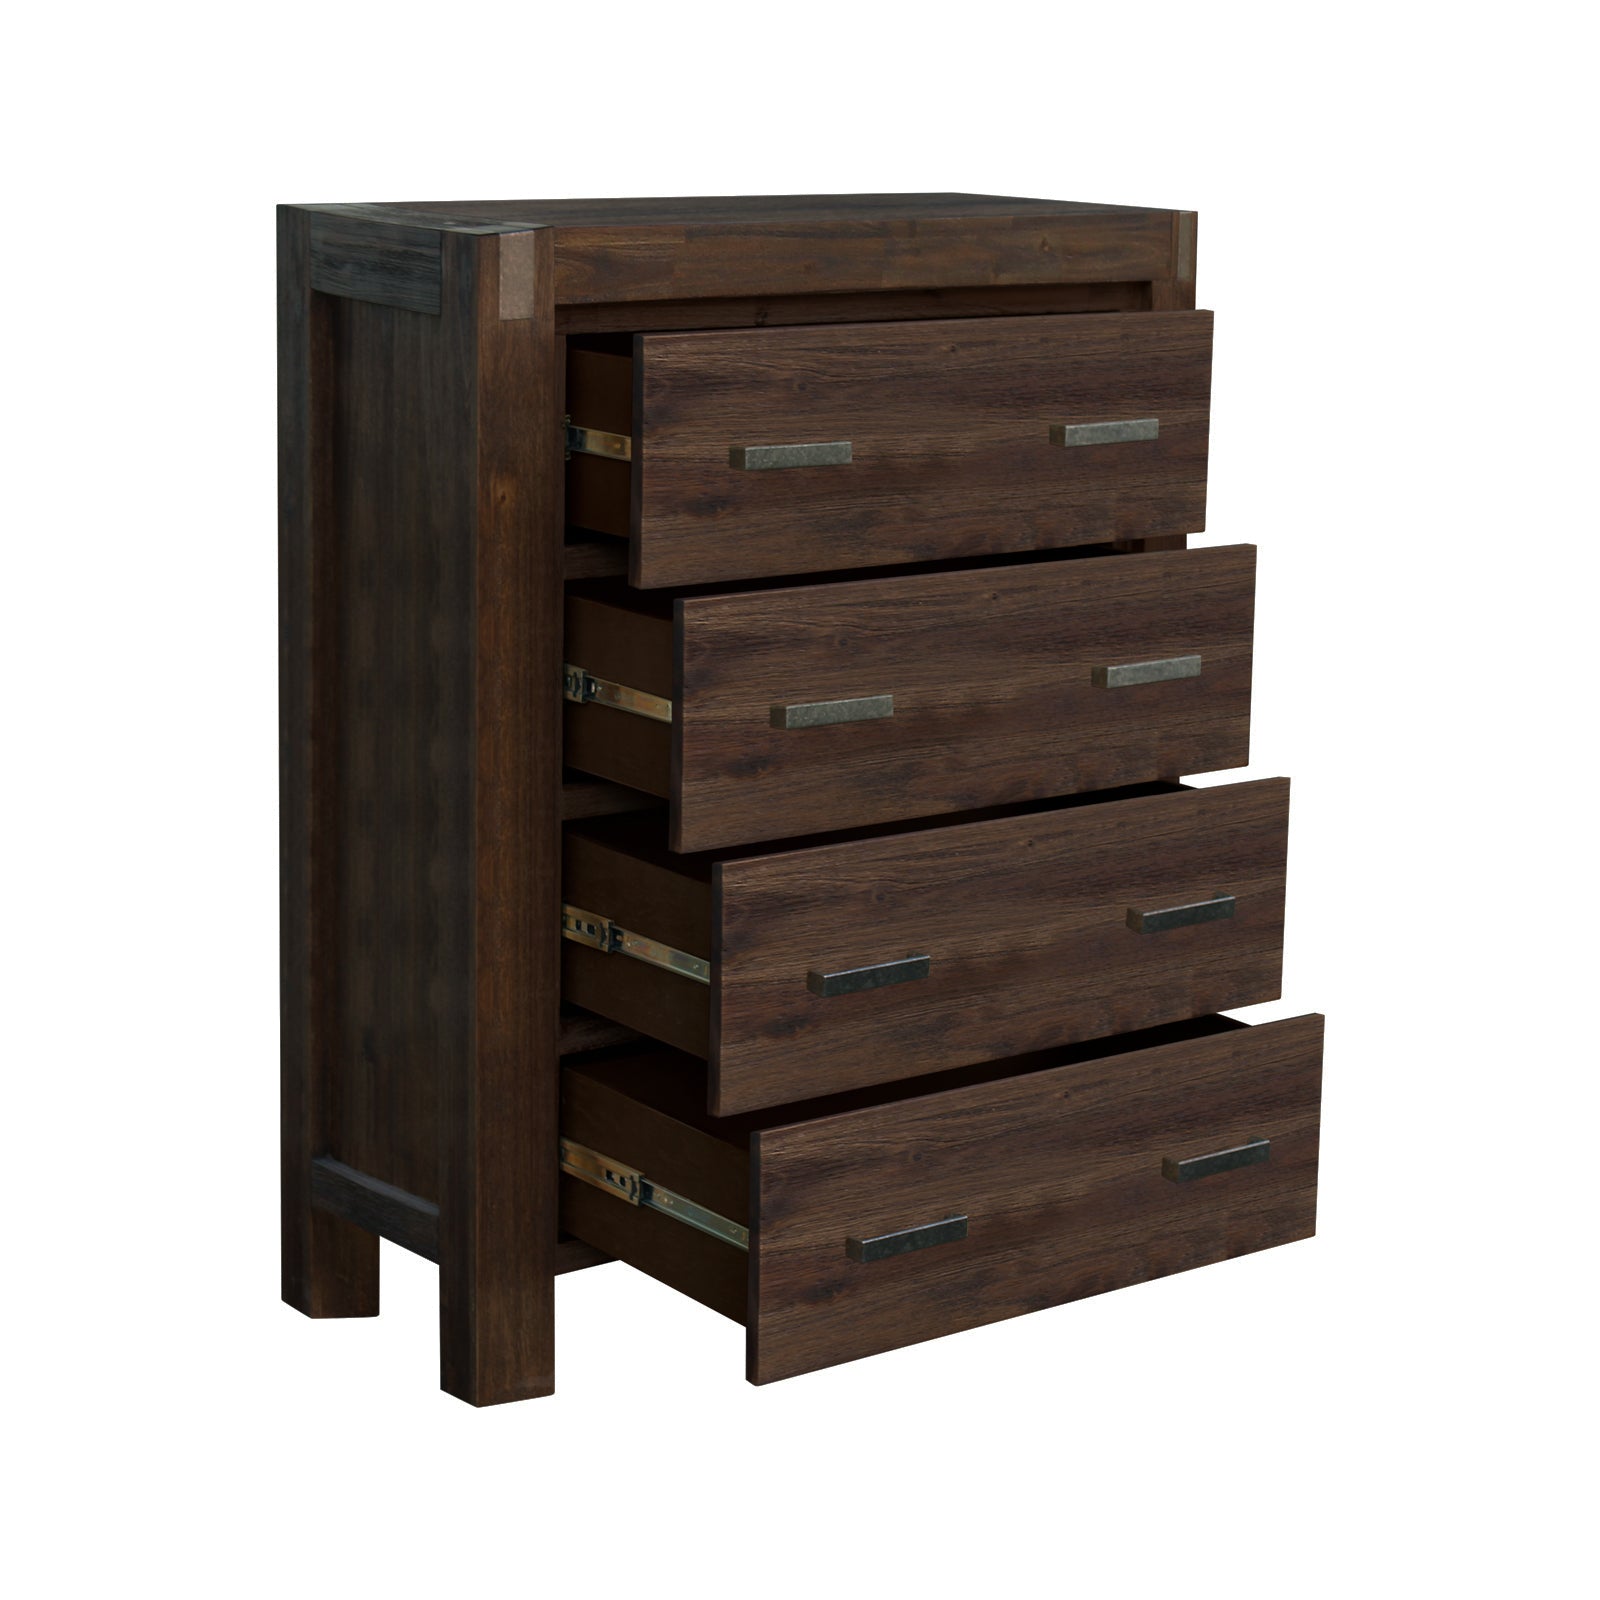 5 Pieces Bedroom Suite in Solid Wood Veneered Acacia Construction Timber Slat Double Size Chocolate Colour Bed, Bedside Table, Tallboy & Dresser - SILBERSHELL